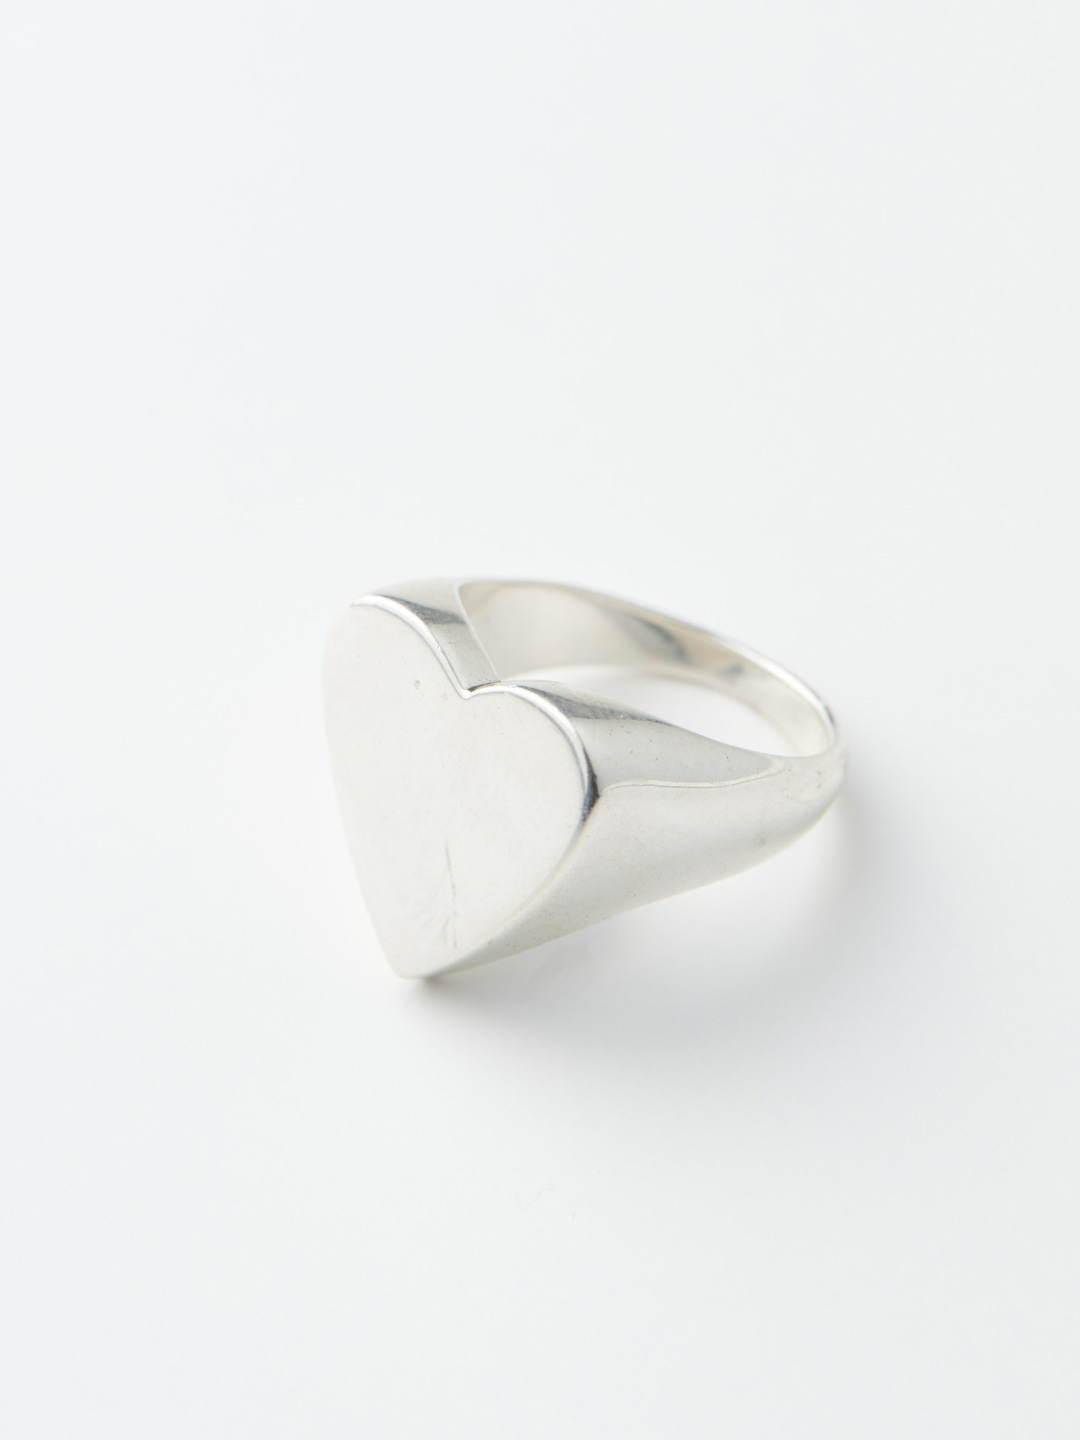 Heart Ring - Silver